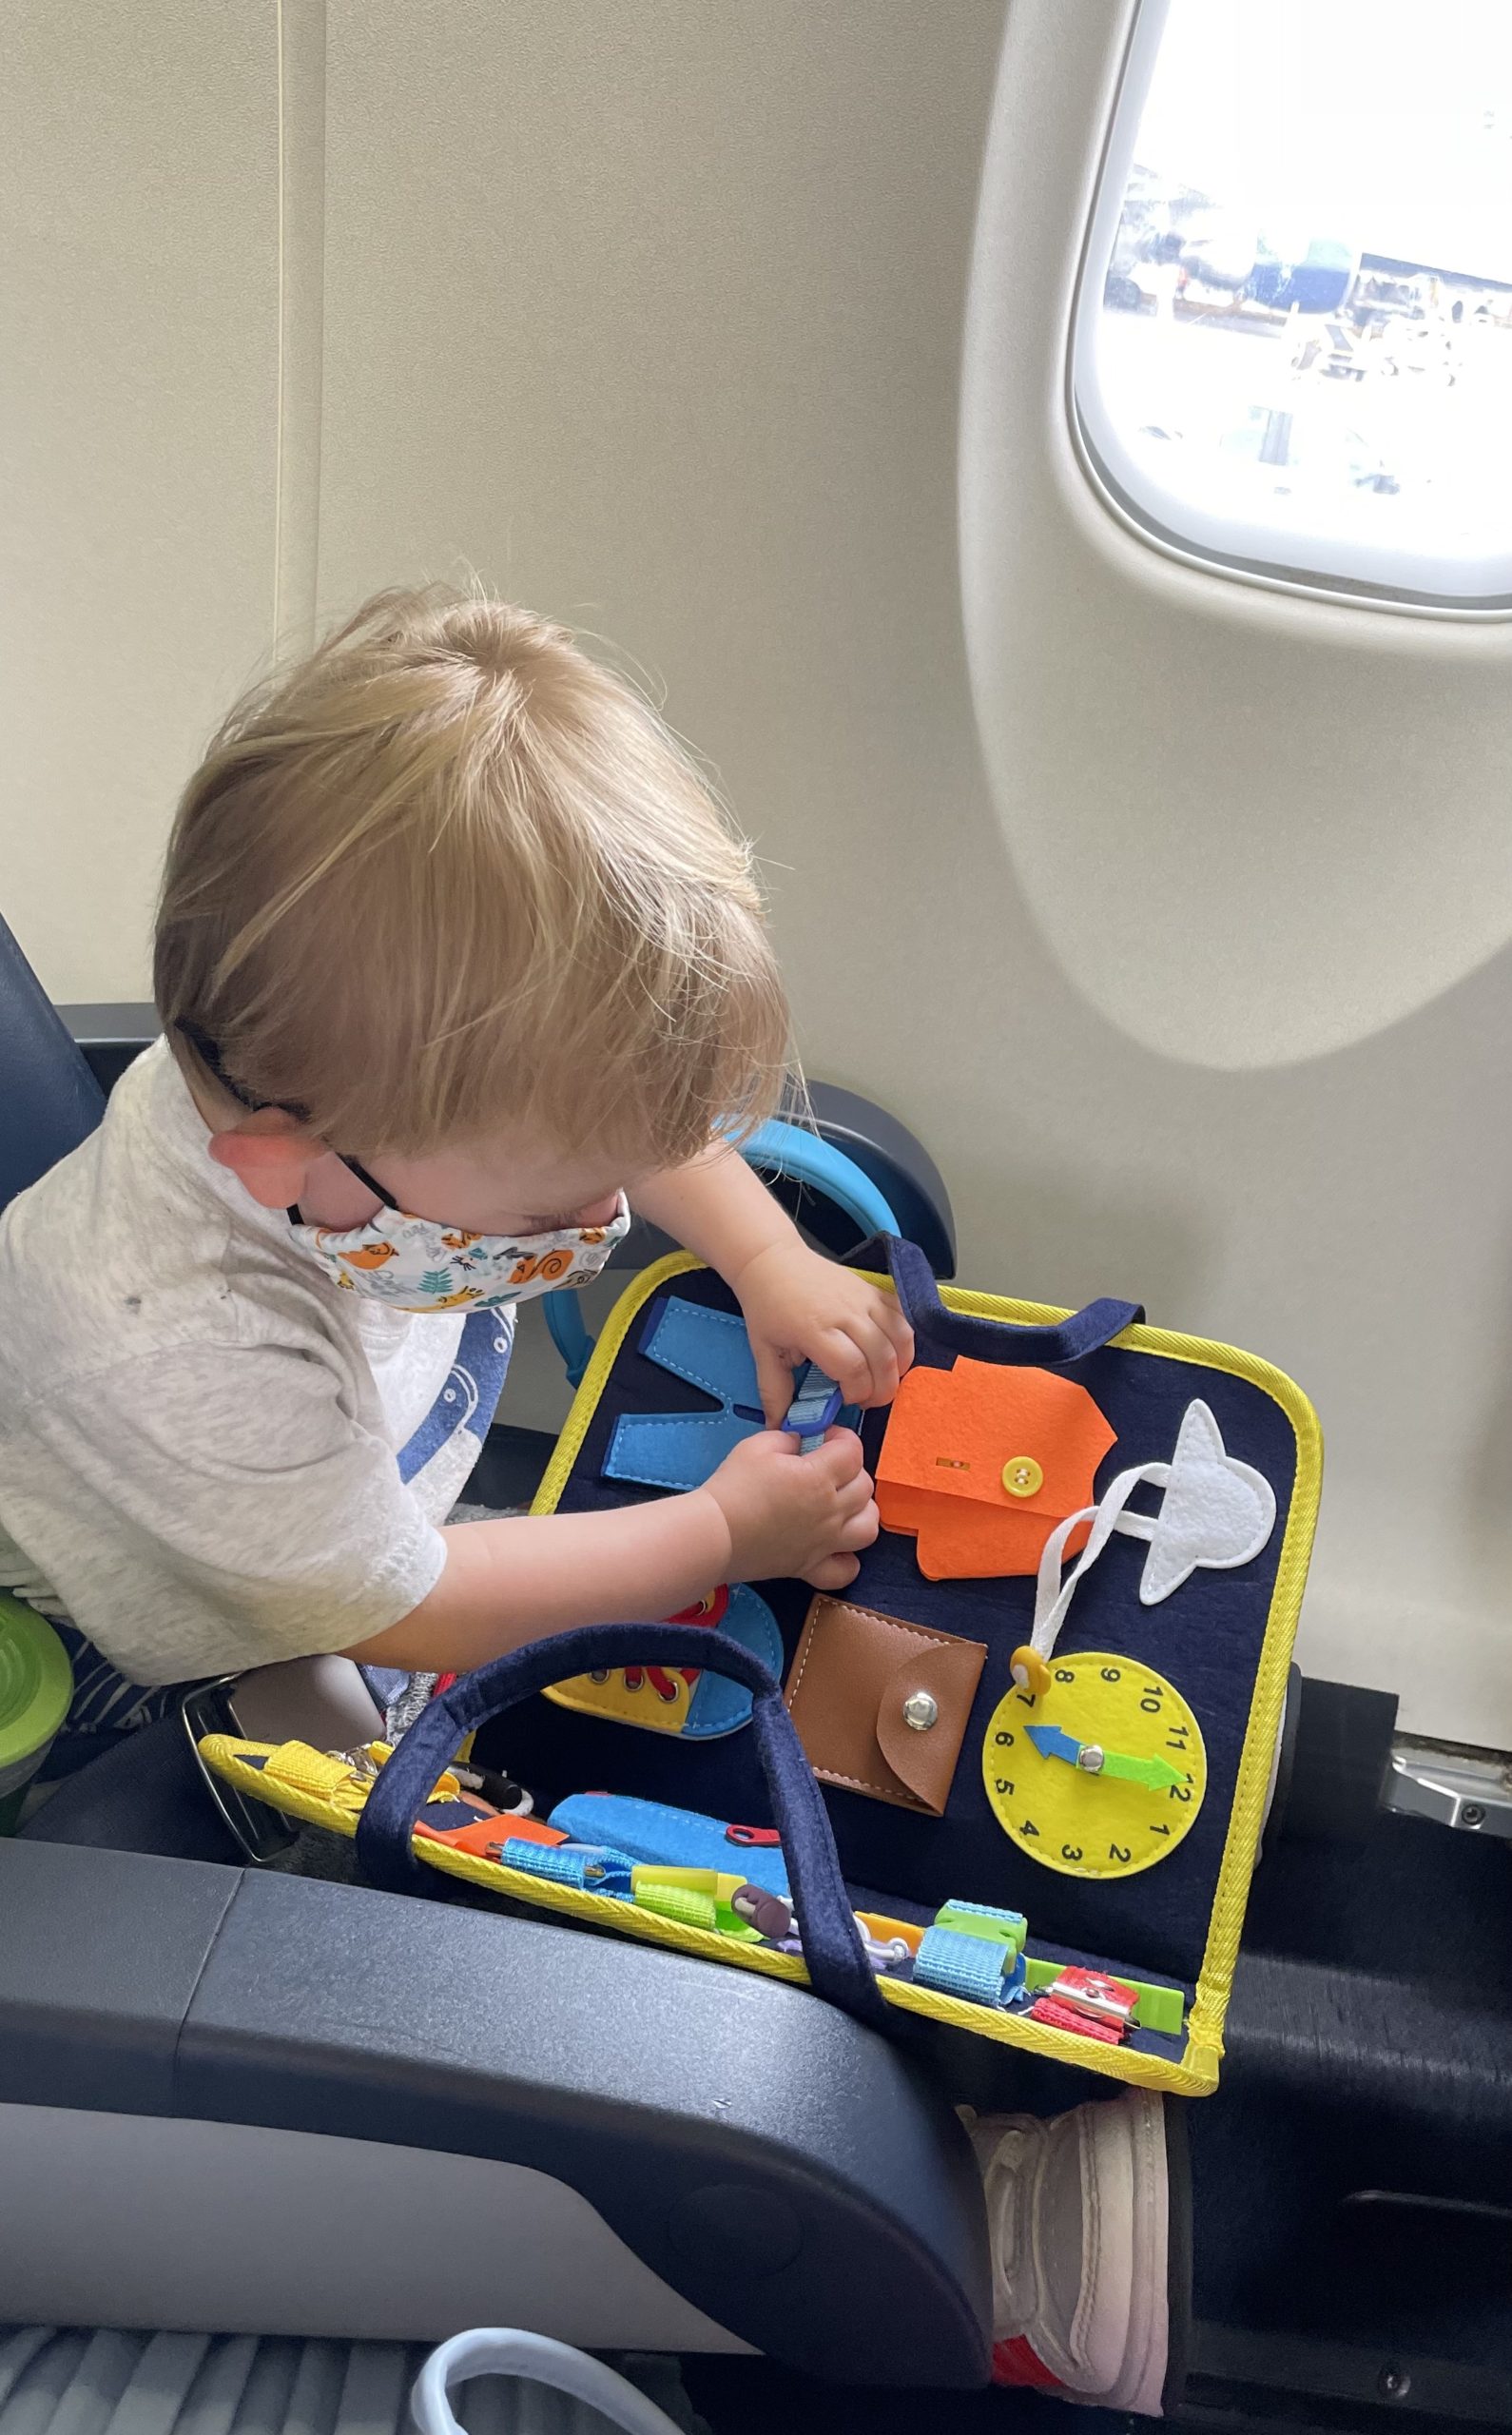 traveling with a toddler on a plane - activity board